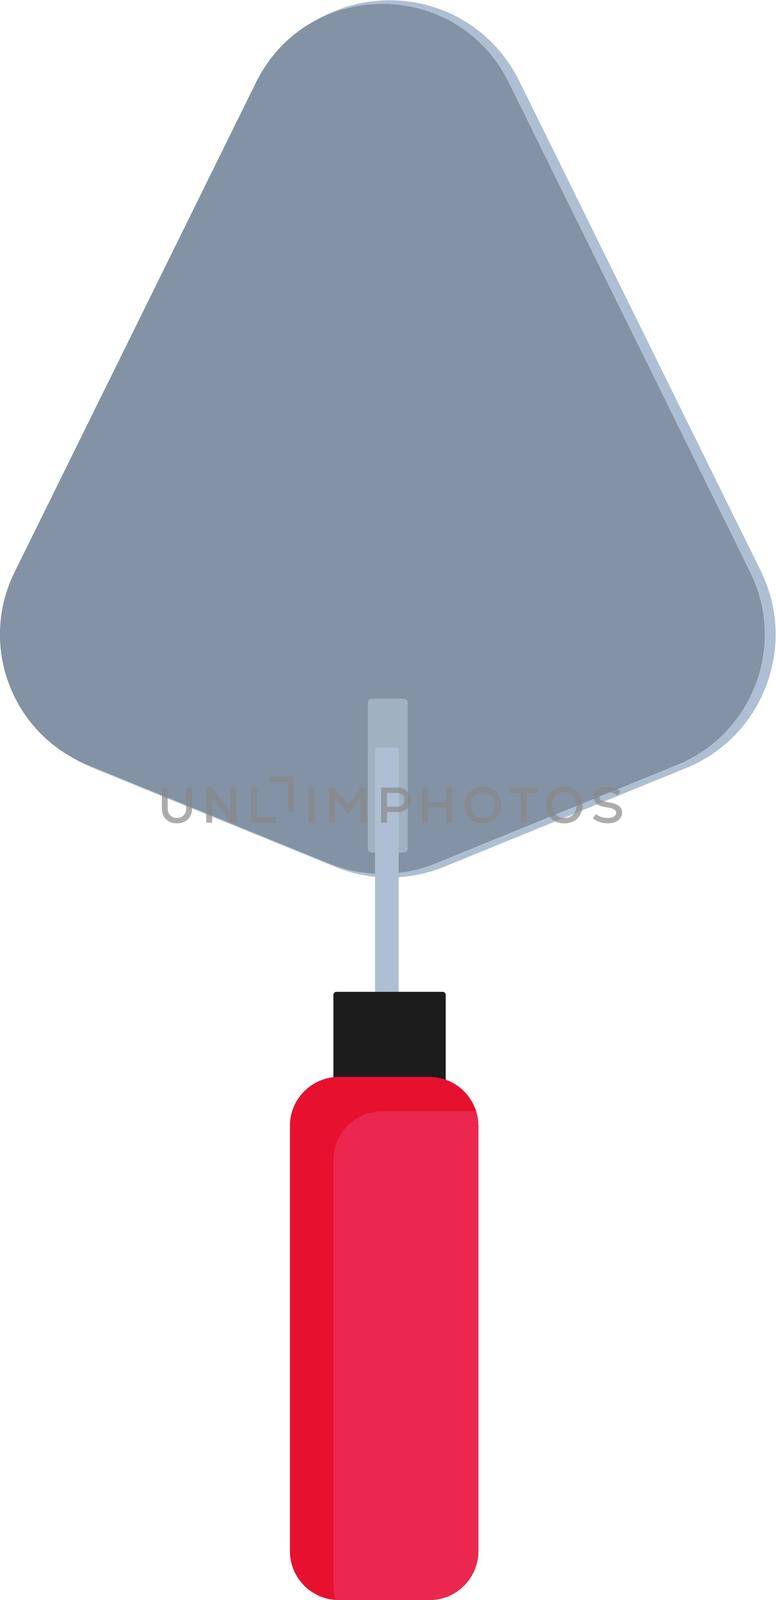 Small trovel, illustration, vector on white background.